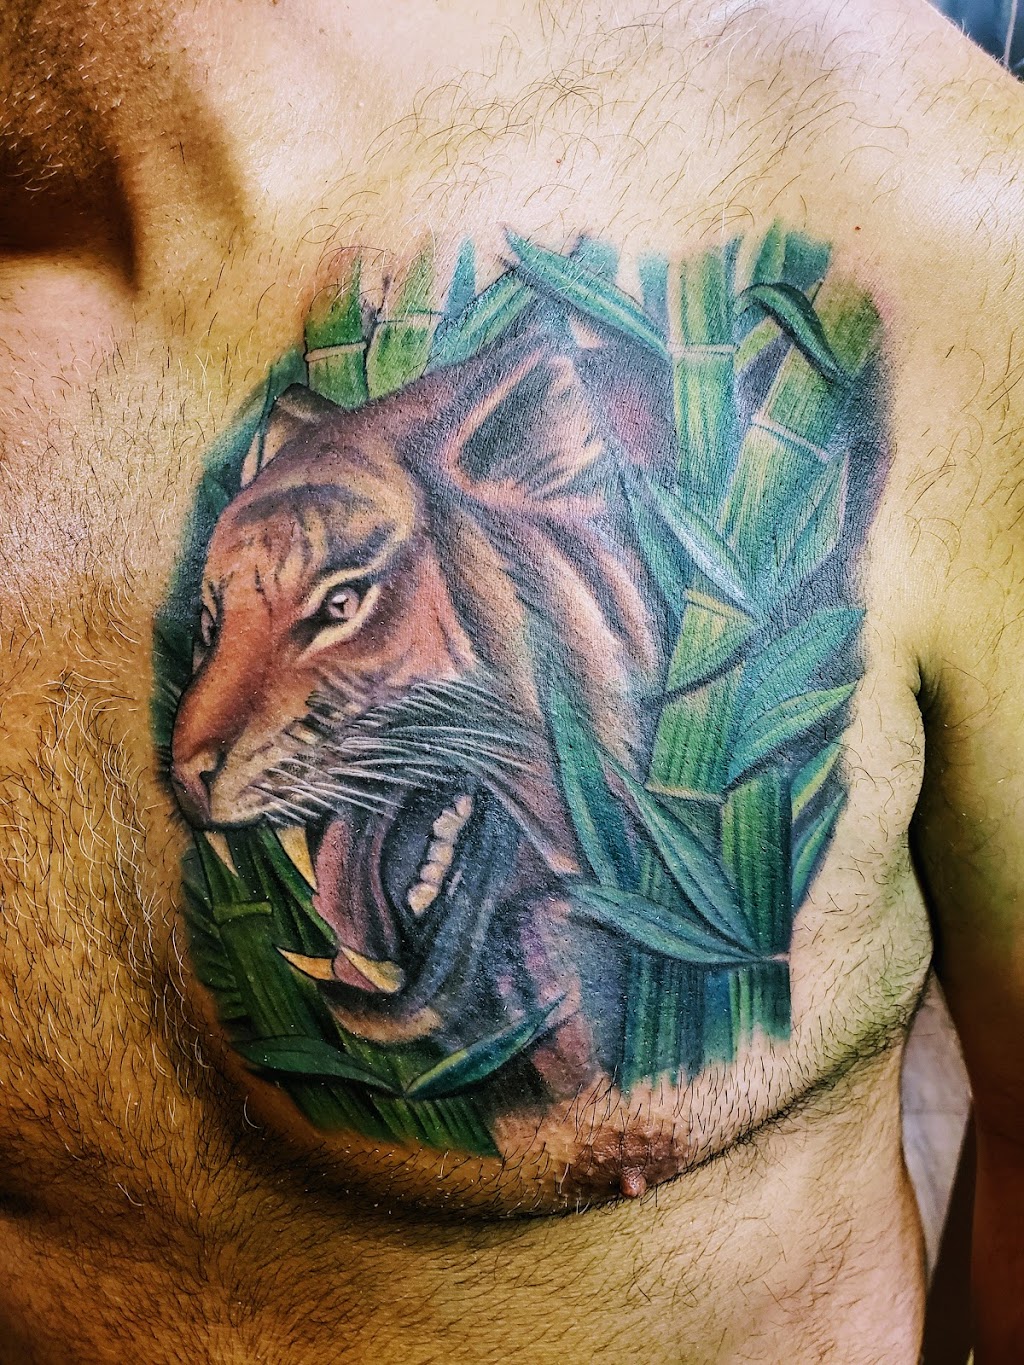 Local Color Tattoo | 1316 West Chester Pike #3, West Chester, PA 19382 | Phone: (610) 918-1920